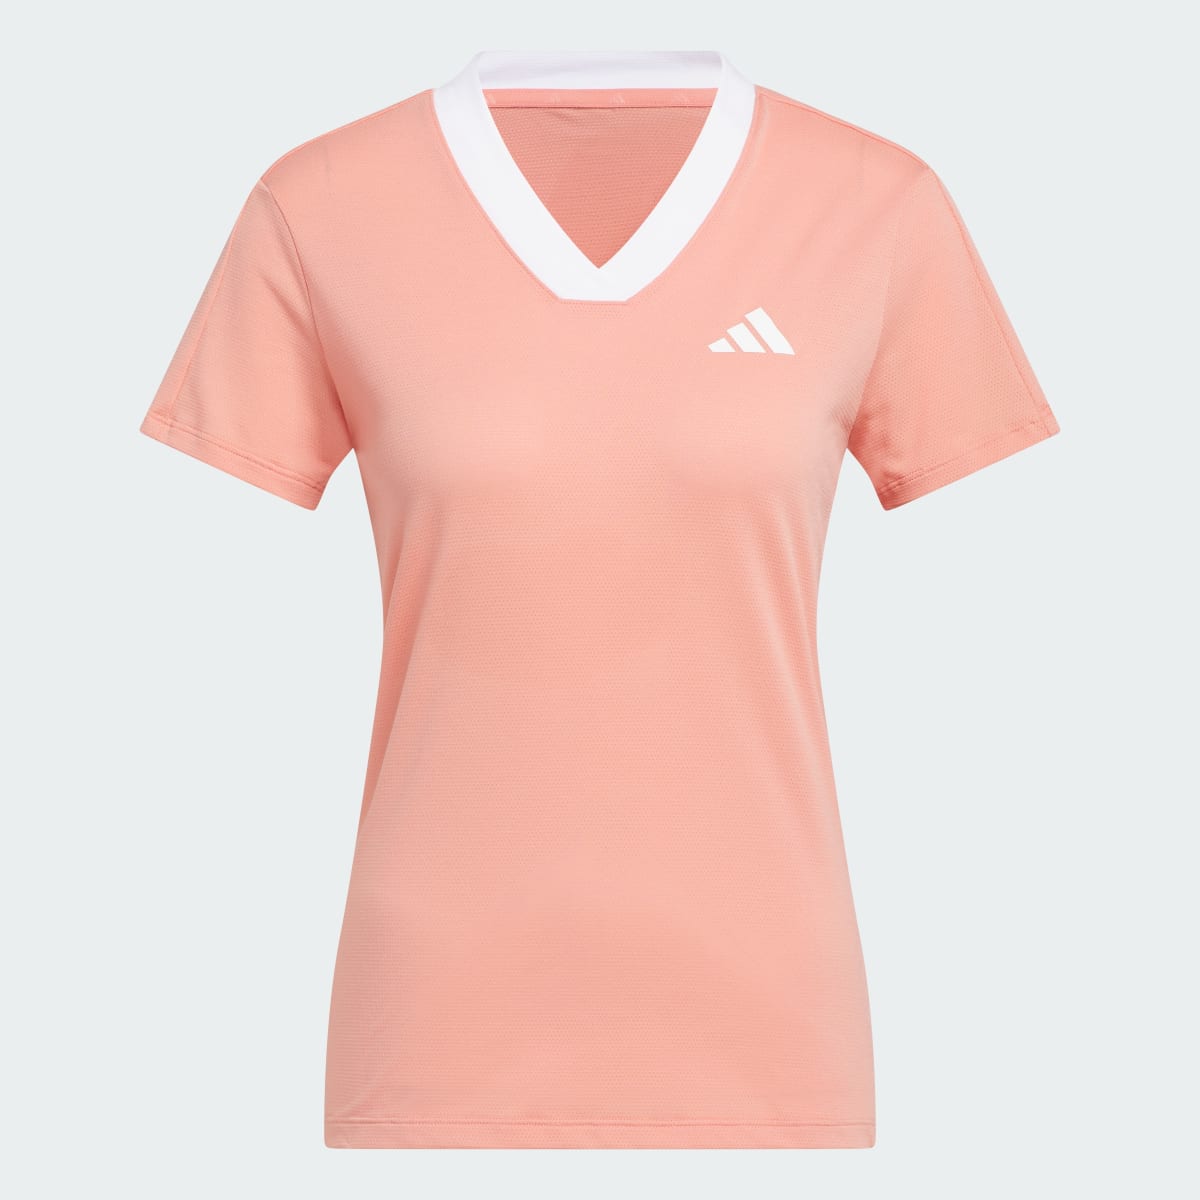 Adidas Made With Nature Golf Top. 5